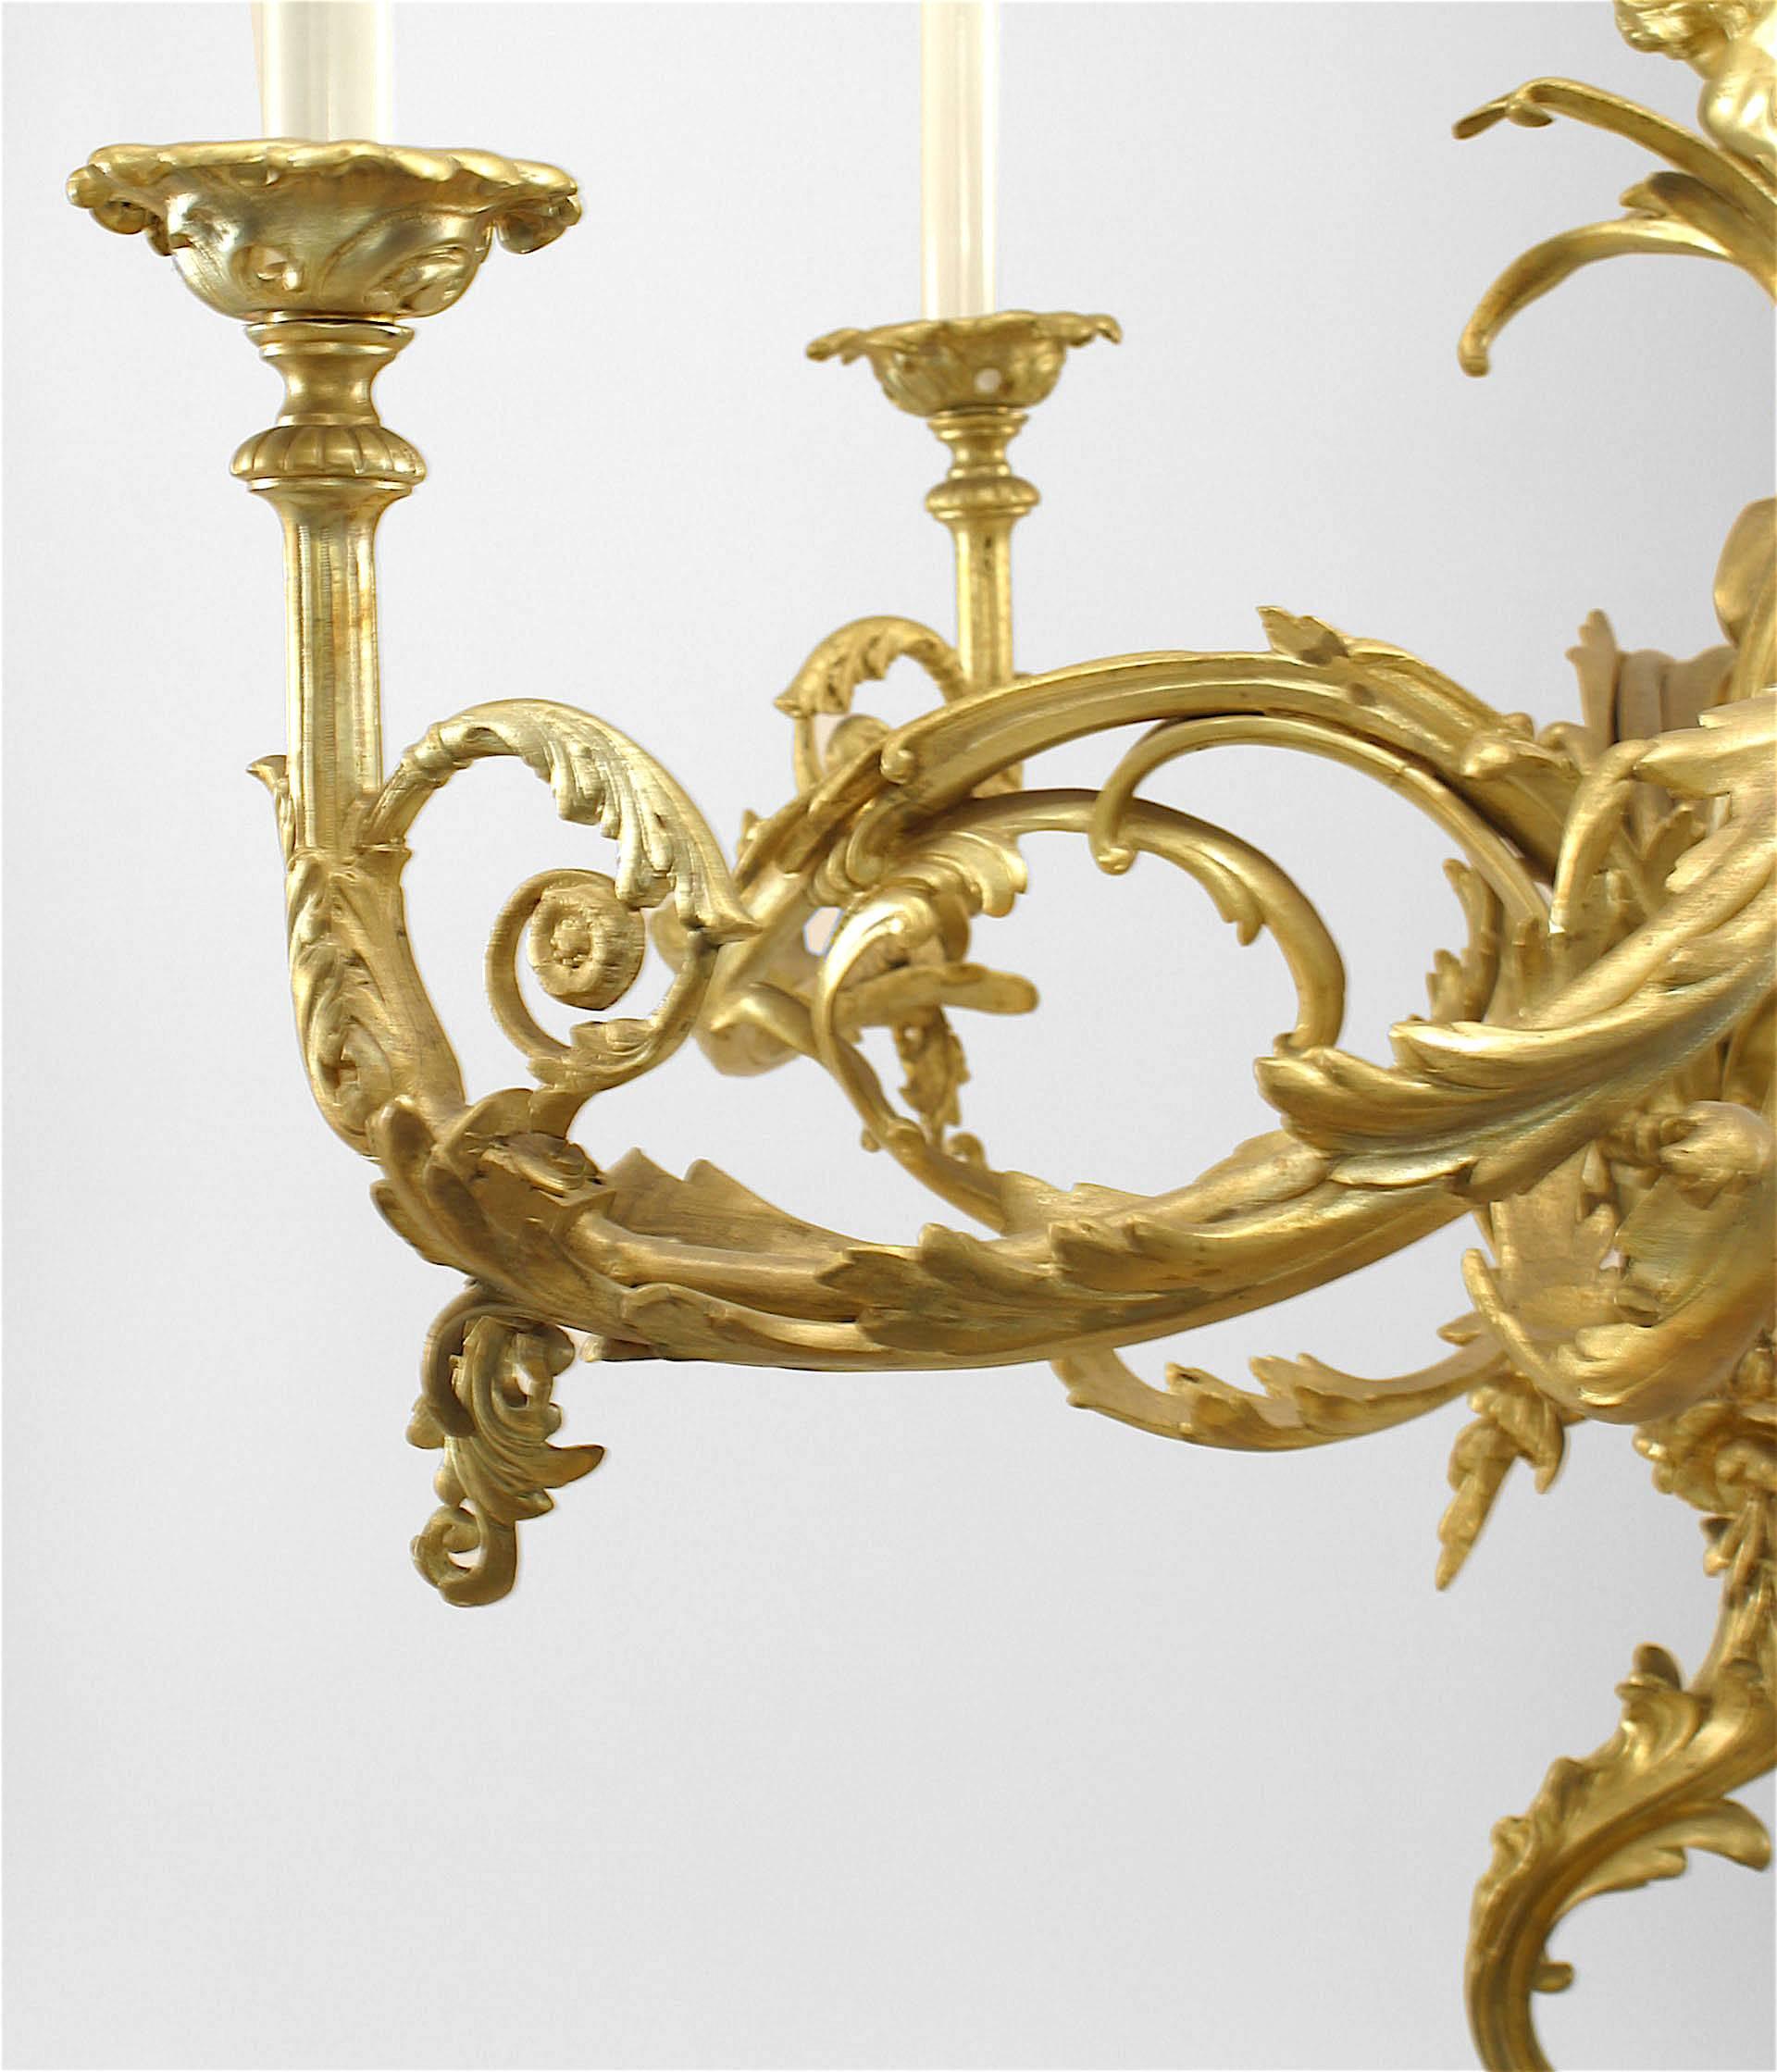 French Louis XV-style (19/20th Century) gilt bronze chandelier with 4 scroll arms and 2 cupid mermaid figures on a center shaft with a scroll top and bottom.
